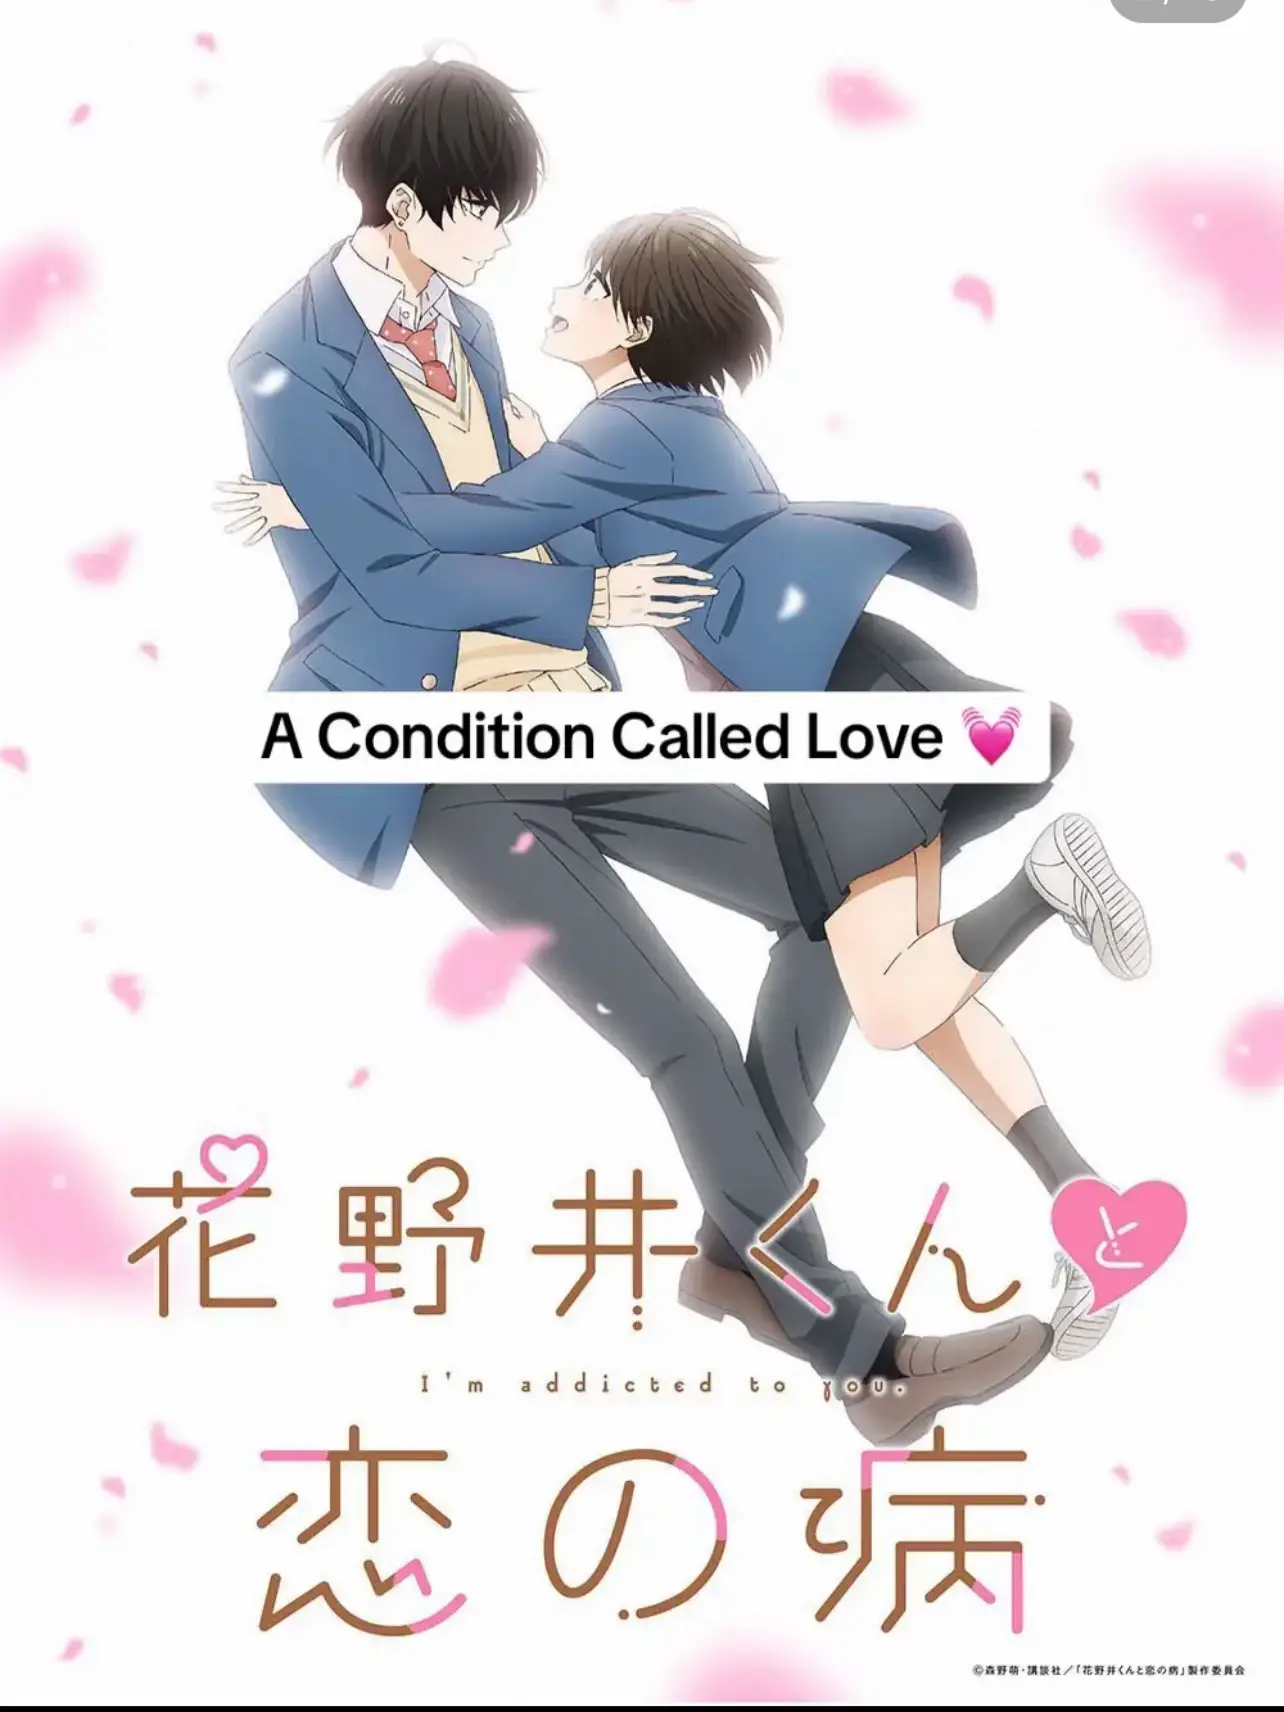 New Romance anime for 2024 Gallery posted by Bubblegumlove Lemon8